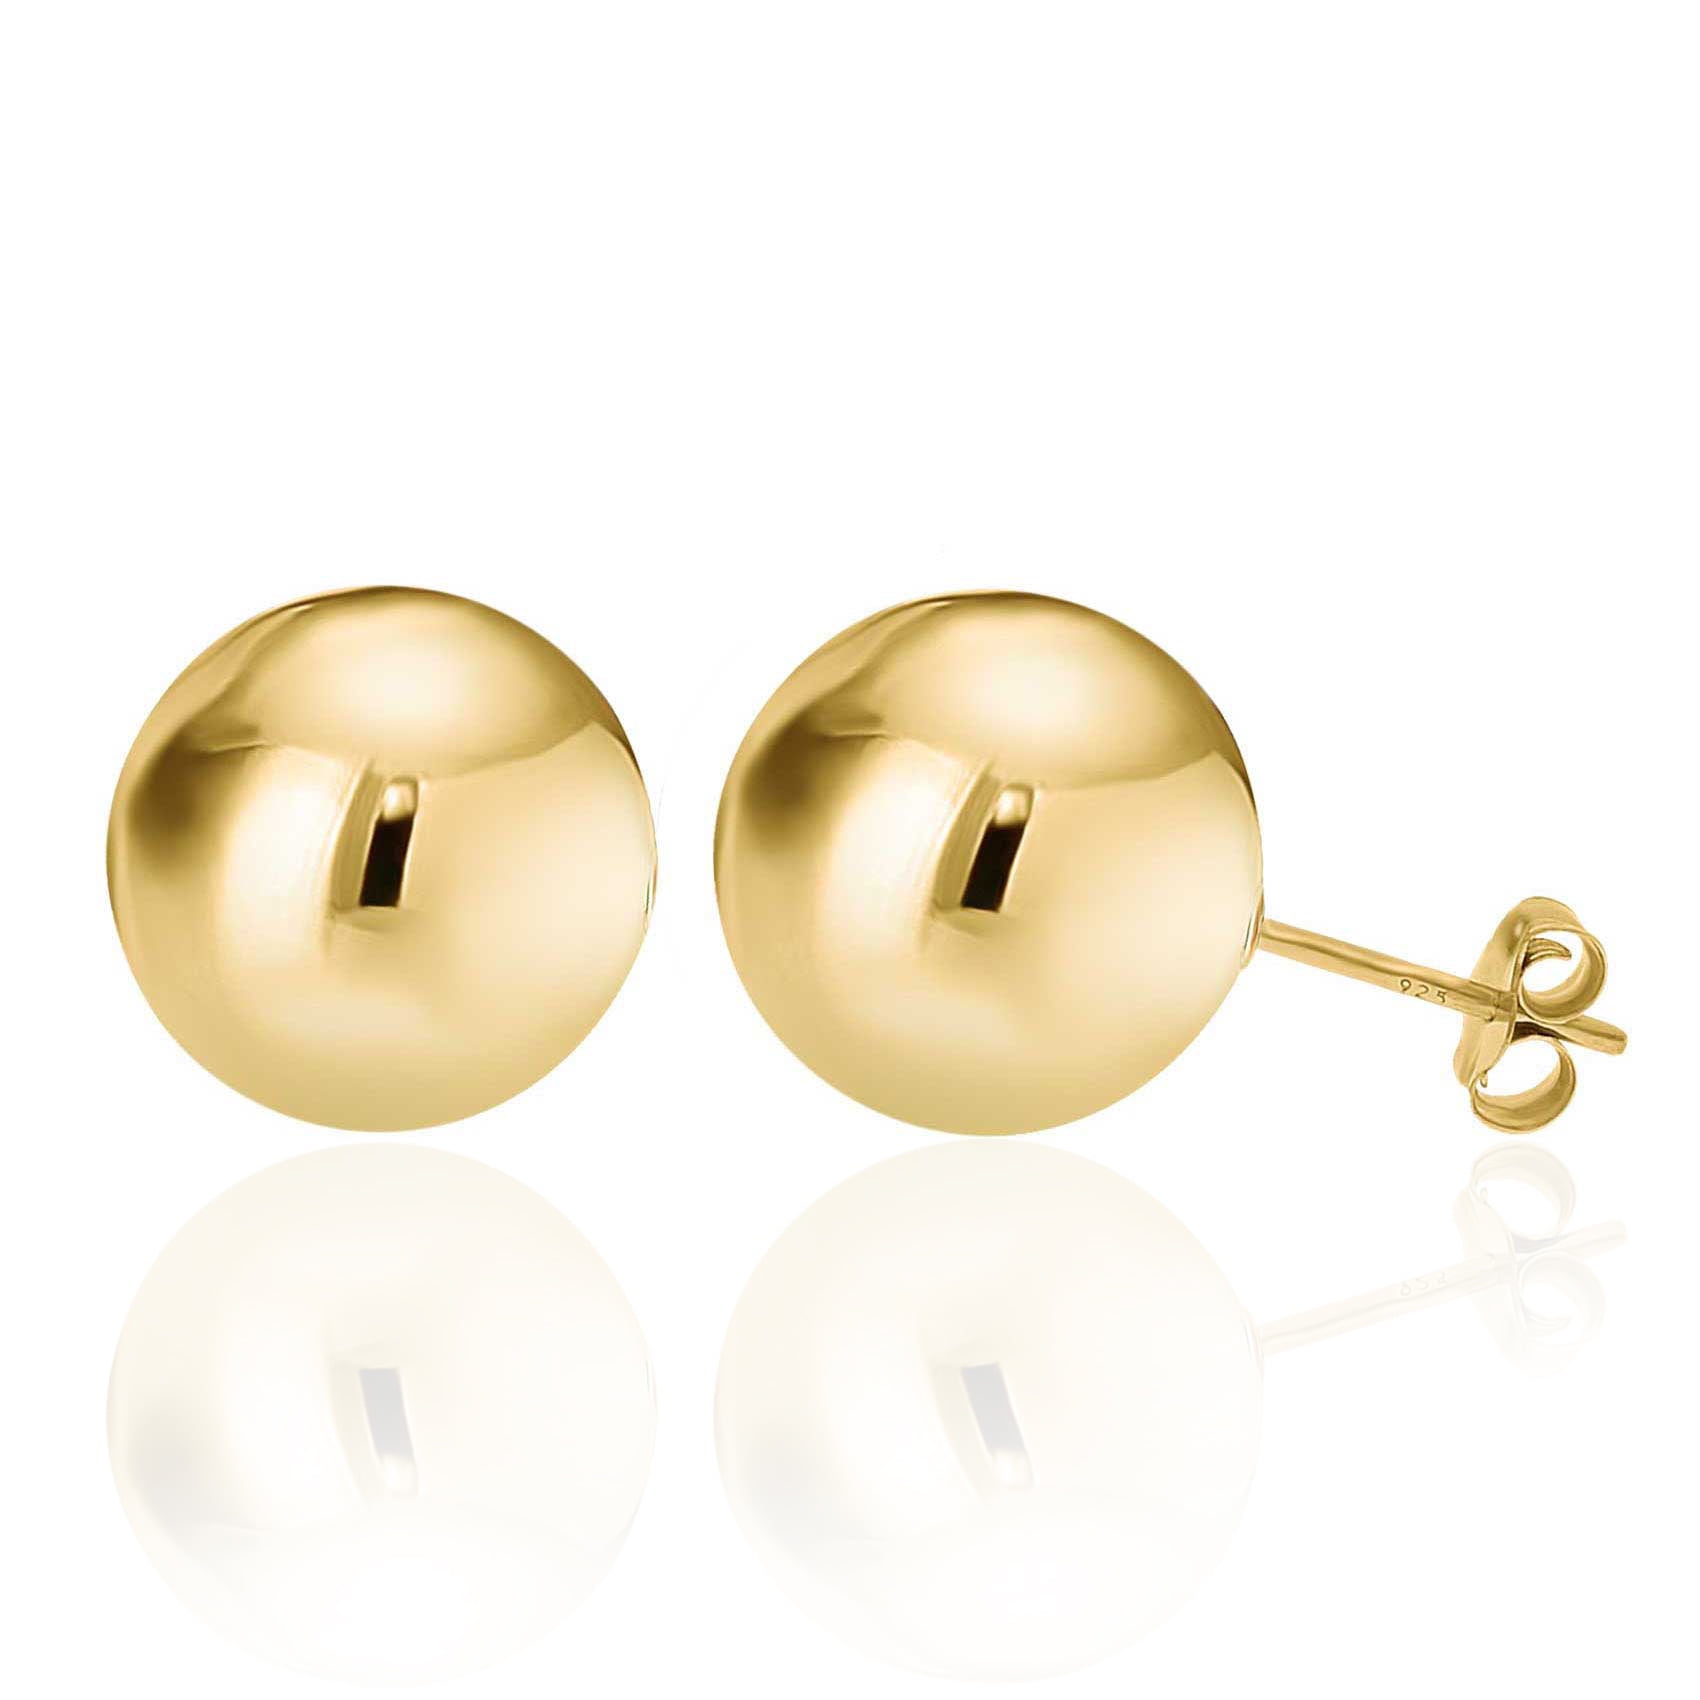 TJC Ball Stud Earrings for Women 14ct Gold Plated 925 Sterling Silver